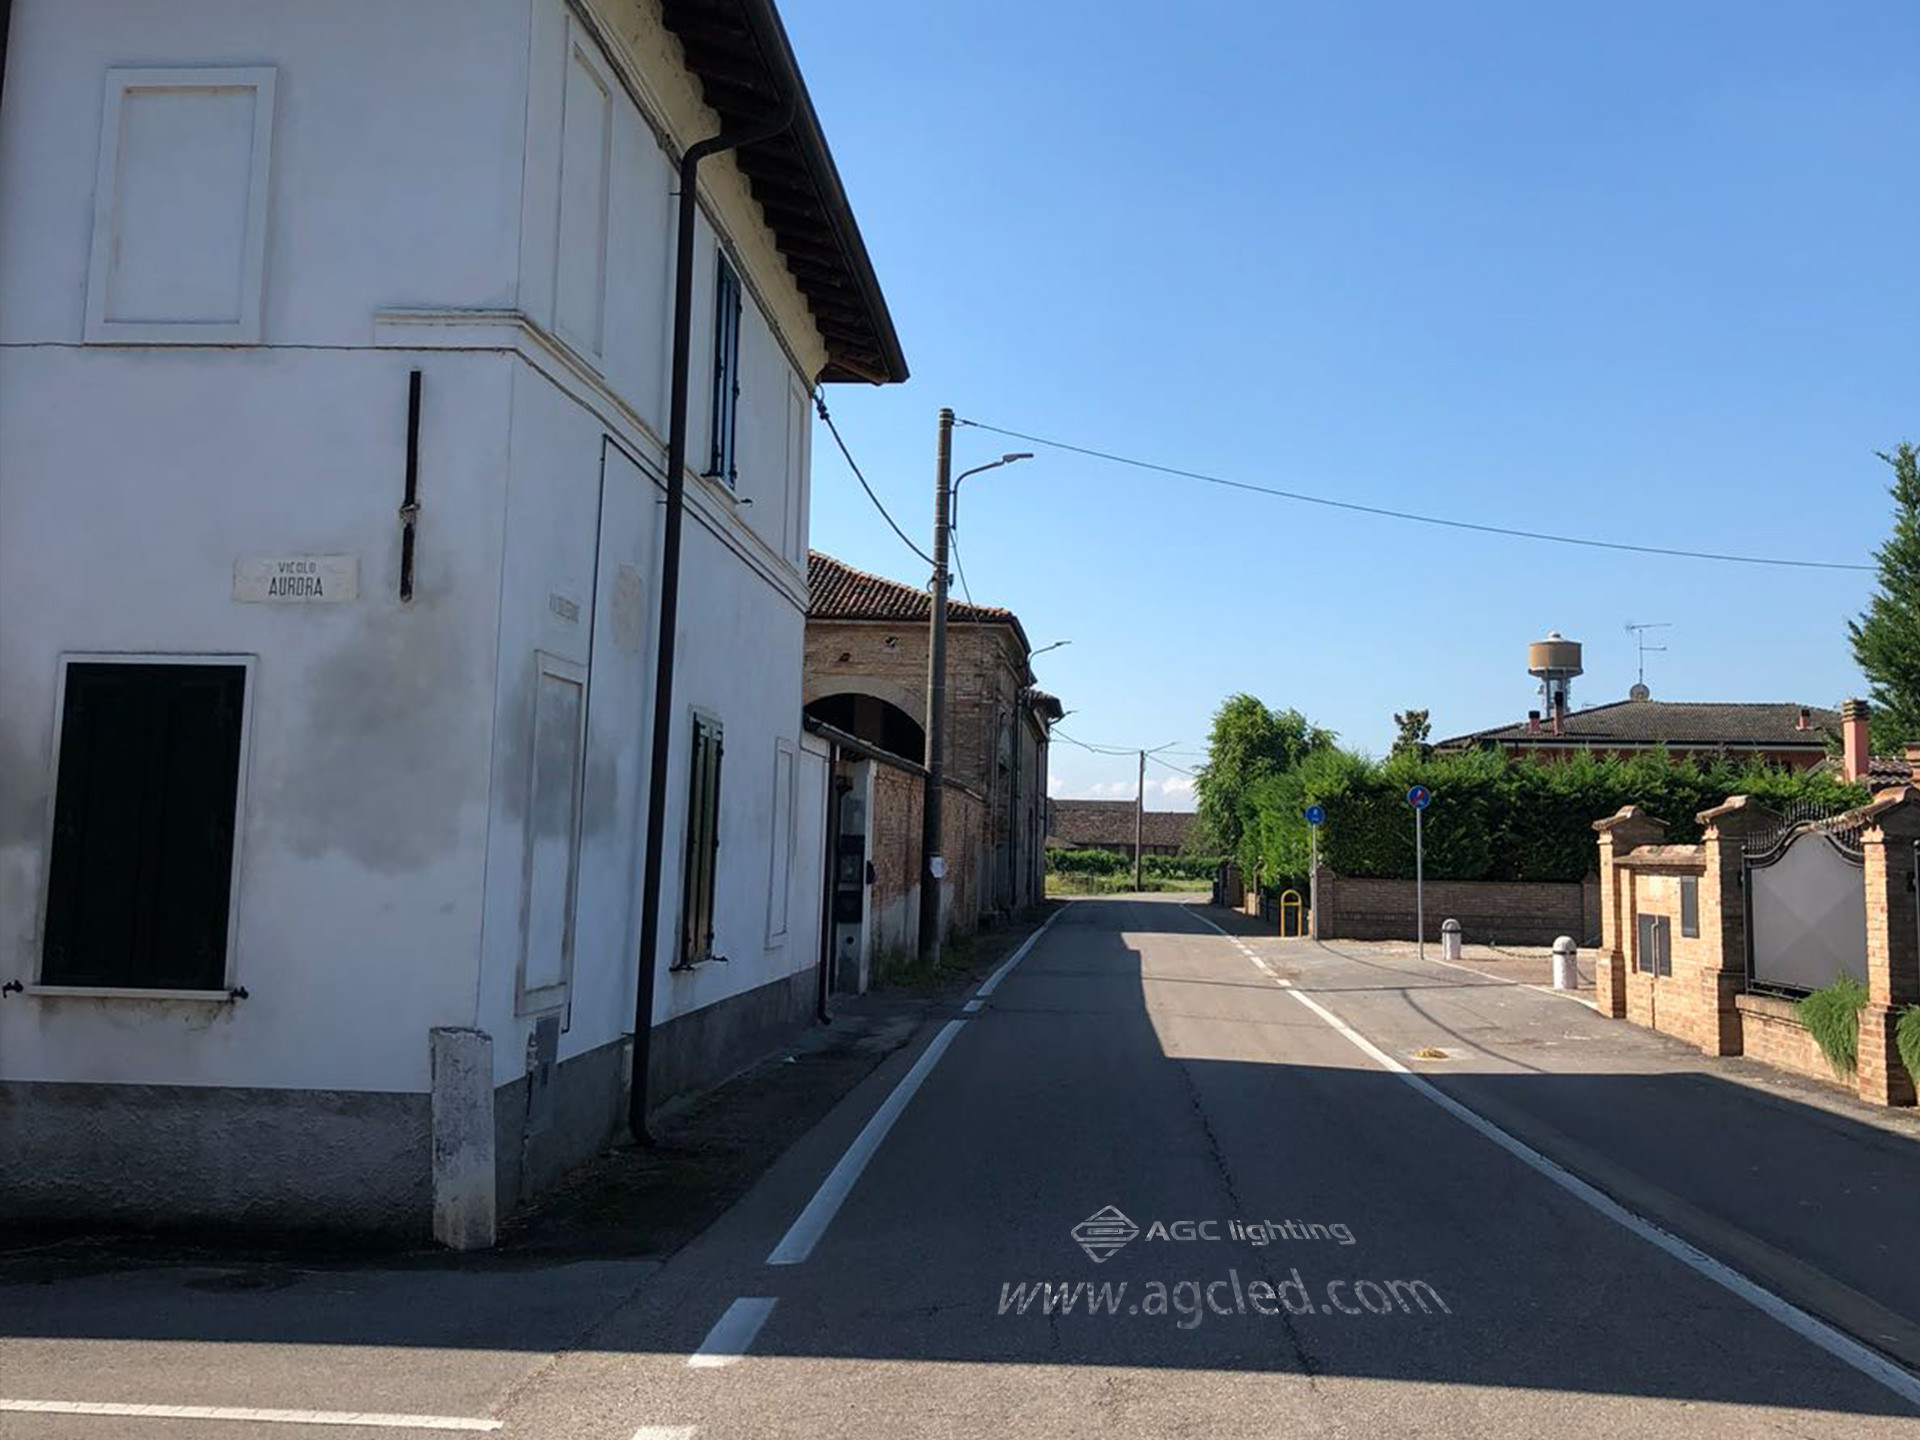 4000K Ra70 led street light in Italy roadway project